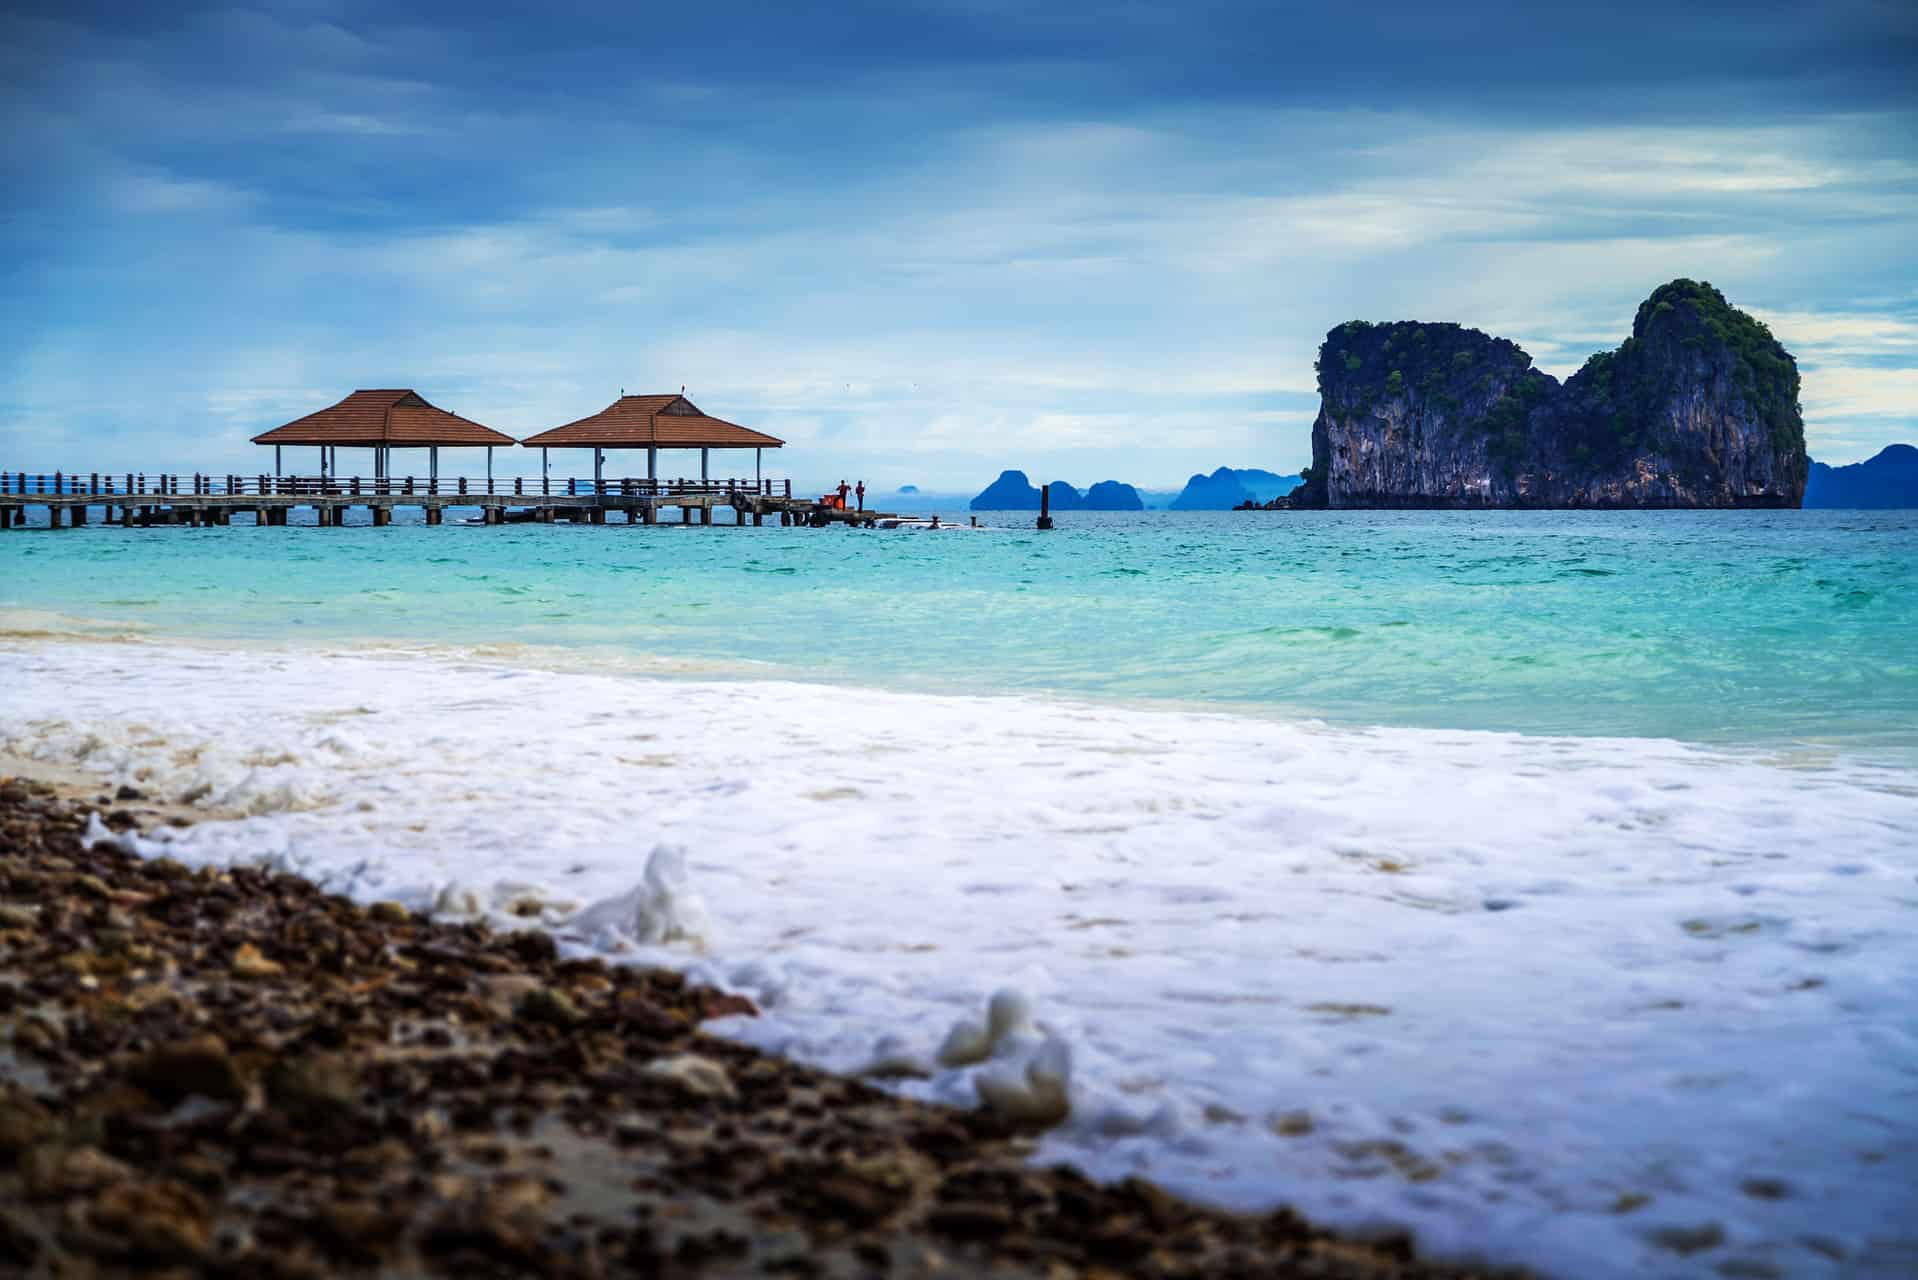 Andaman Sea View In Koh Ngai Island In Thailand